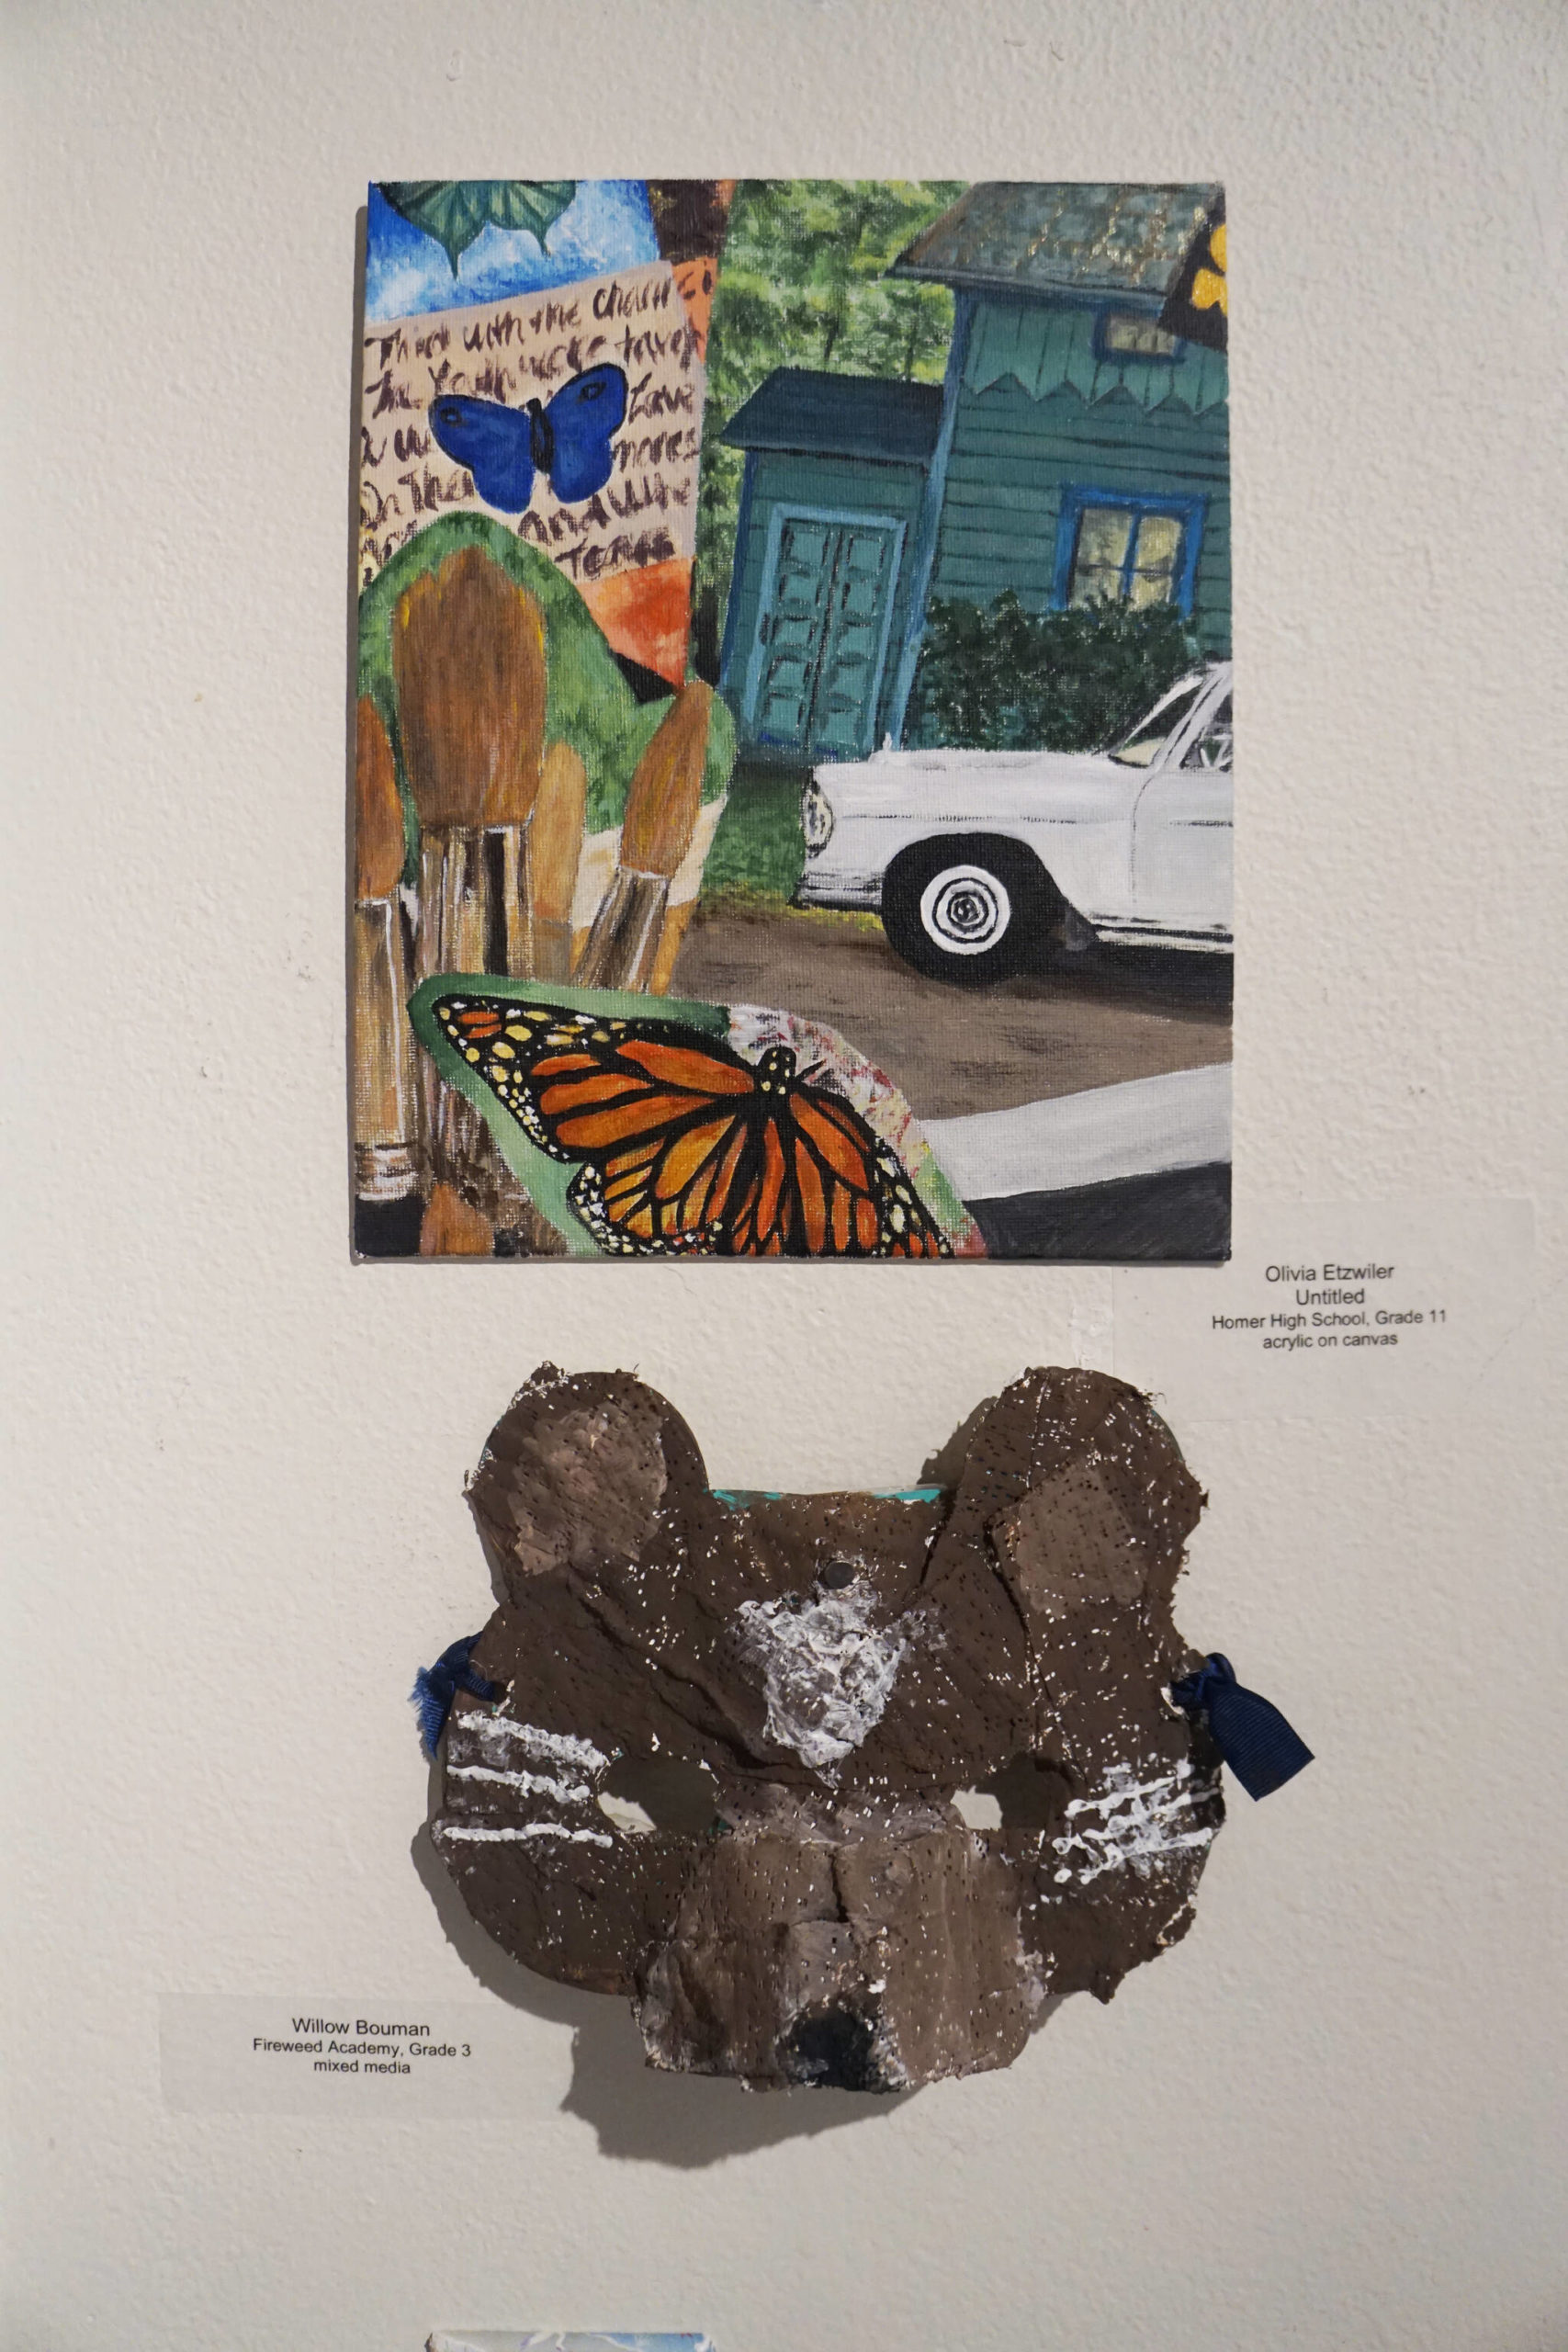 Grade 11 Homer High School student Olivia Etzwiler’s “Untitled,” is at top, and grade 3 Fireweed Academy student Willow Bouman’s mask is at bottom. (Photo by Michael Armstrong/Homer News)